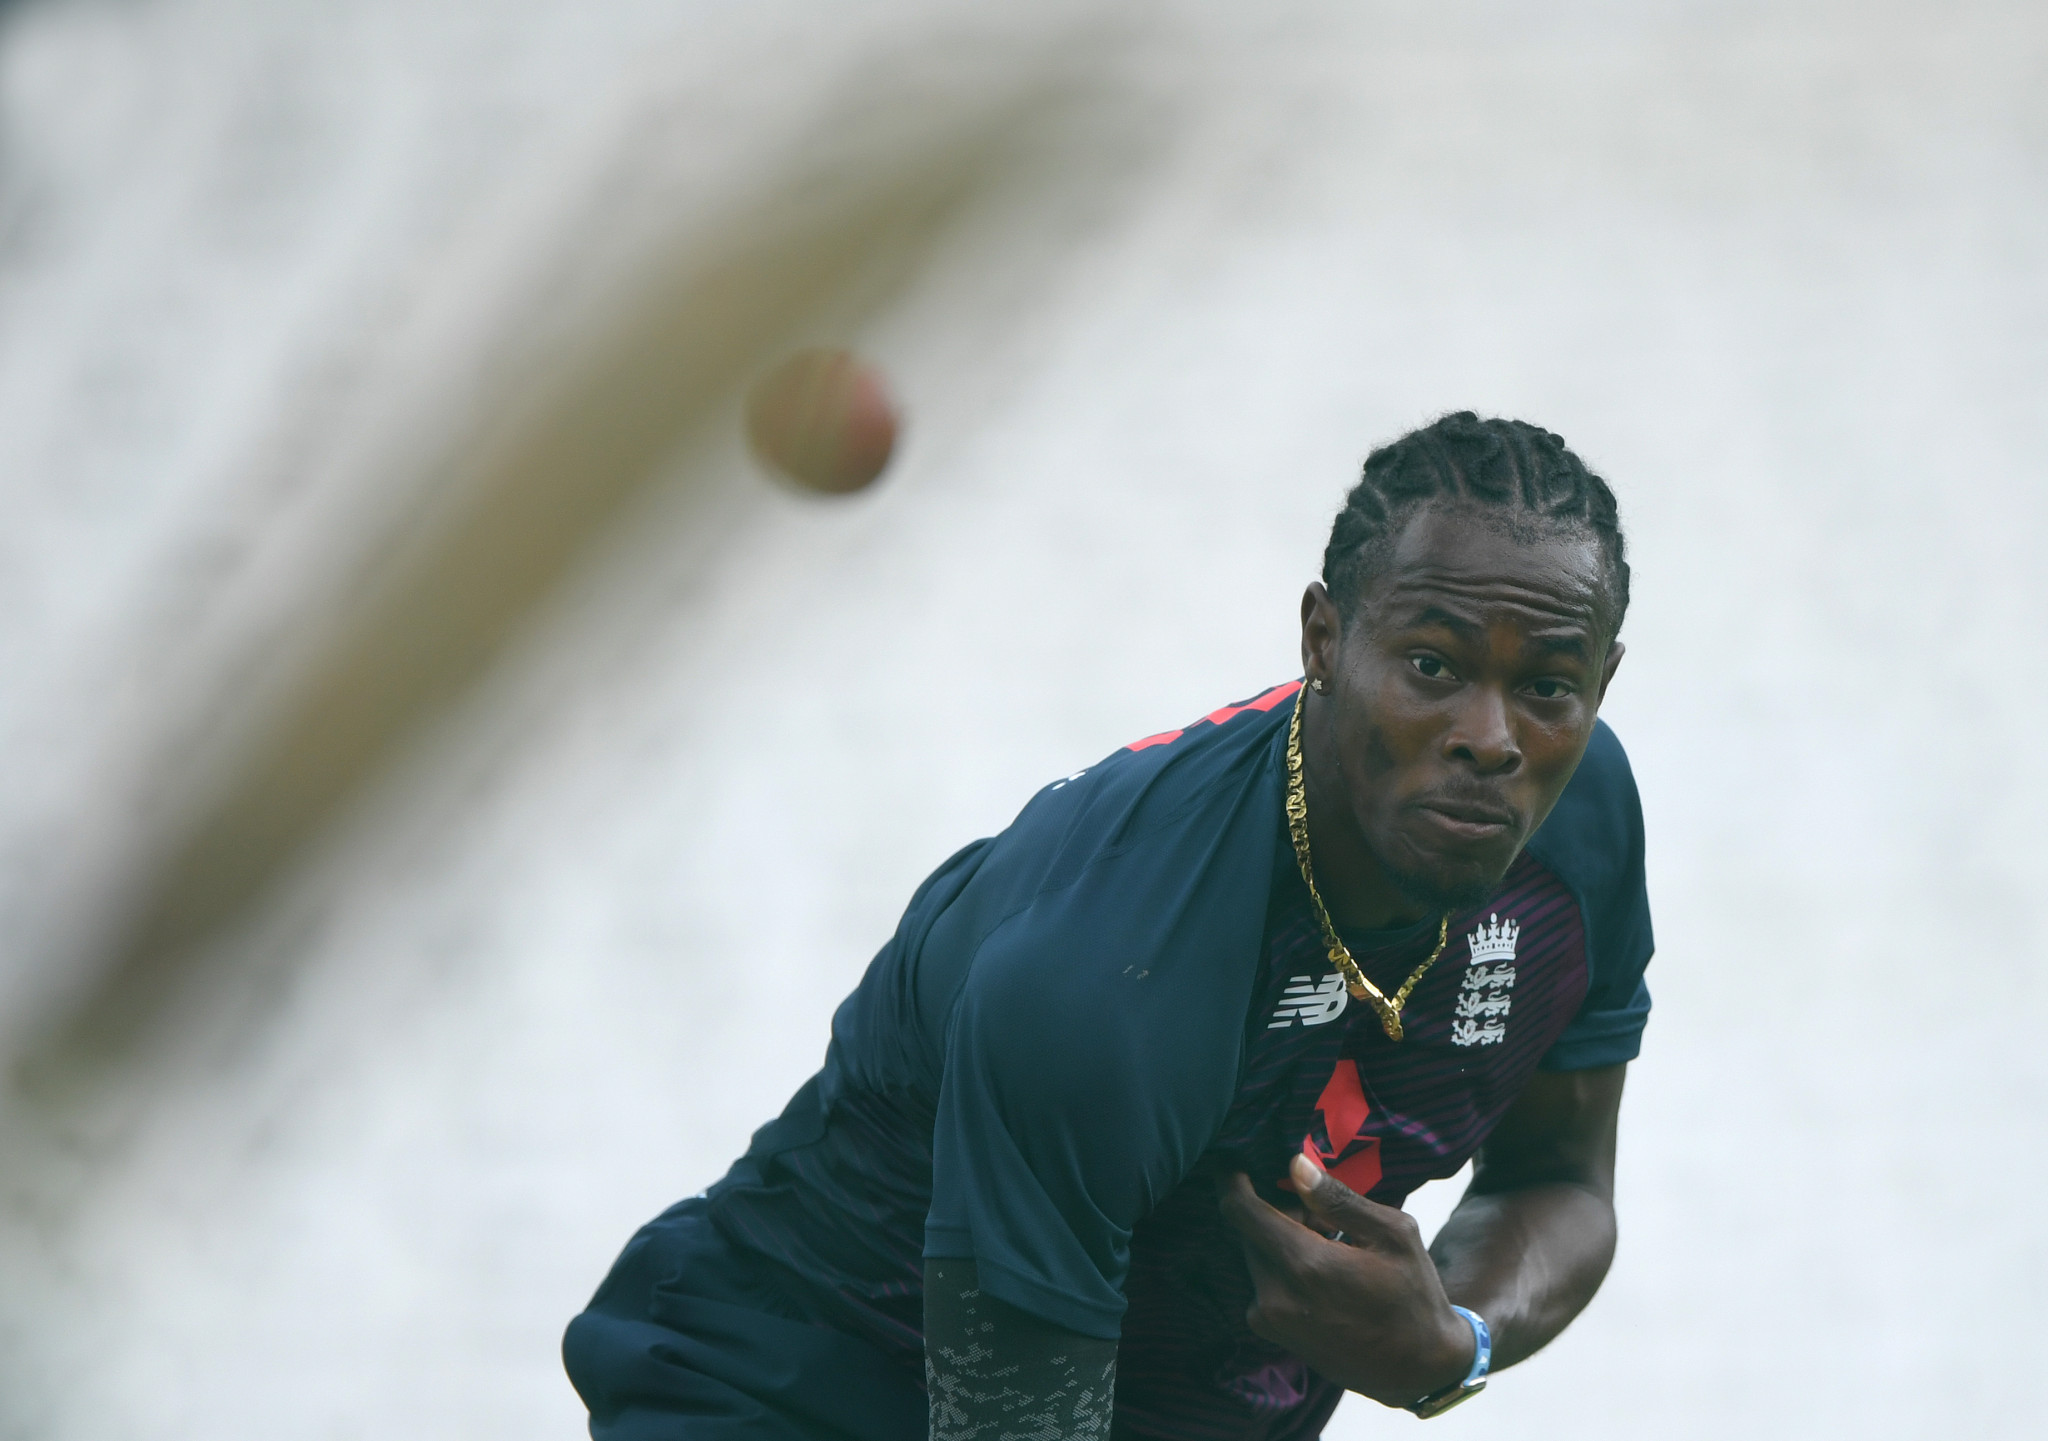 England's World Cup winner Jofra Archer played for the team part-owned by Deepak Agarwal in 2018 ©Getty Images